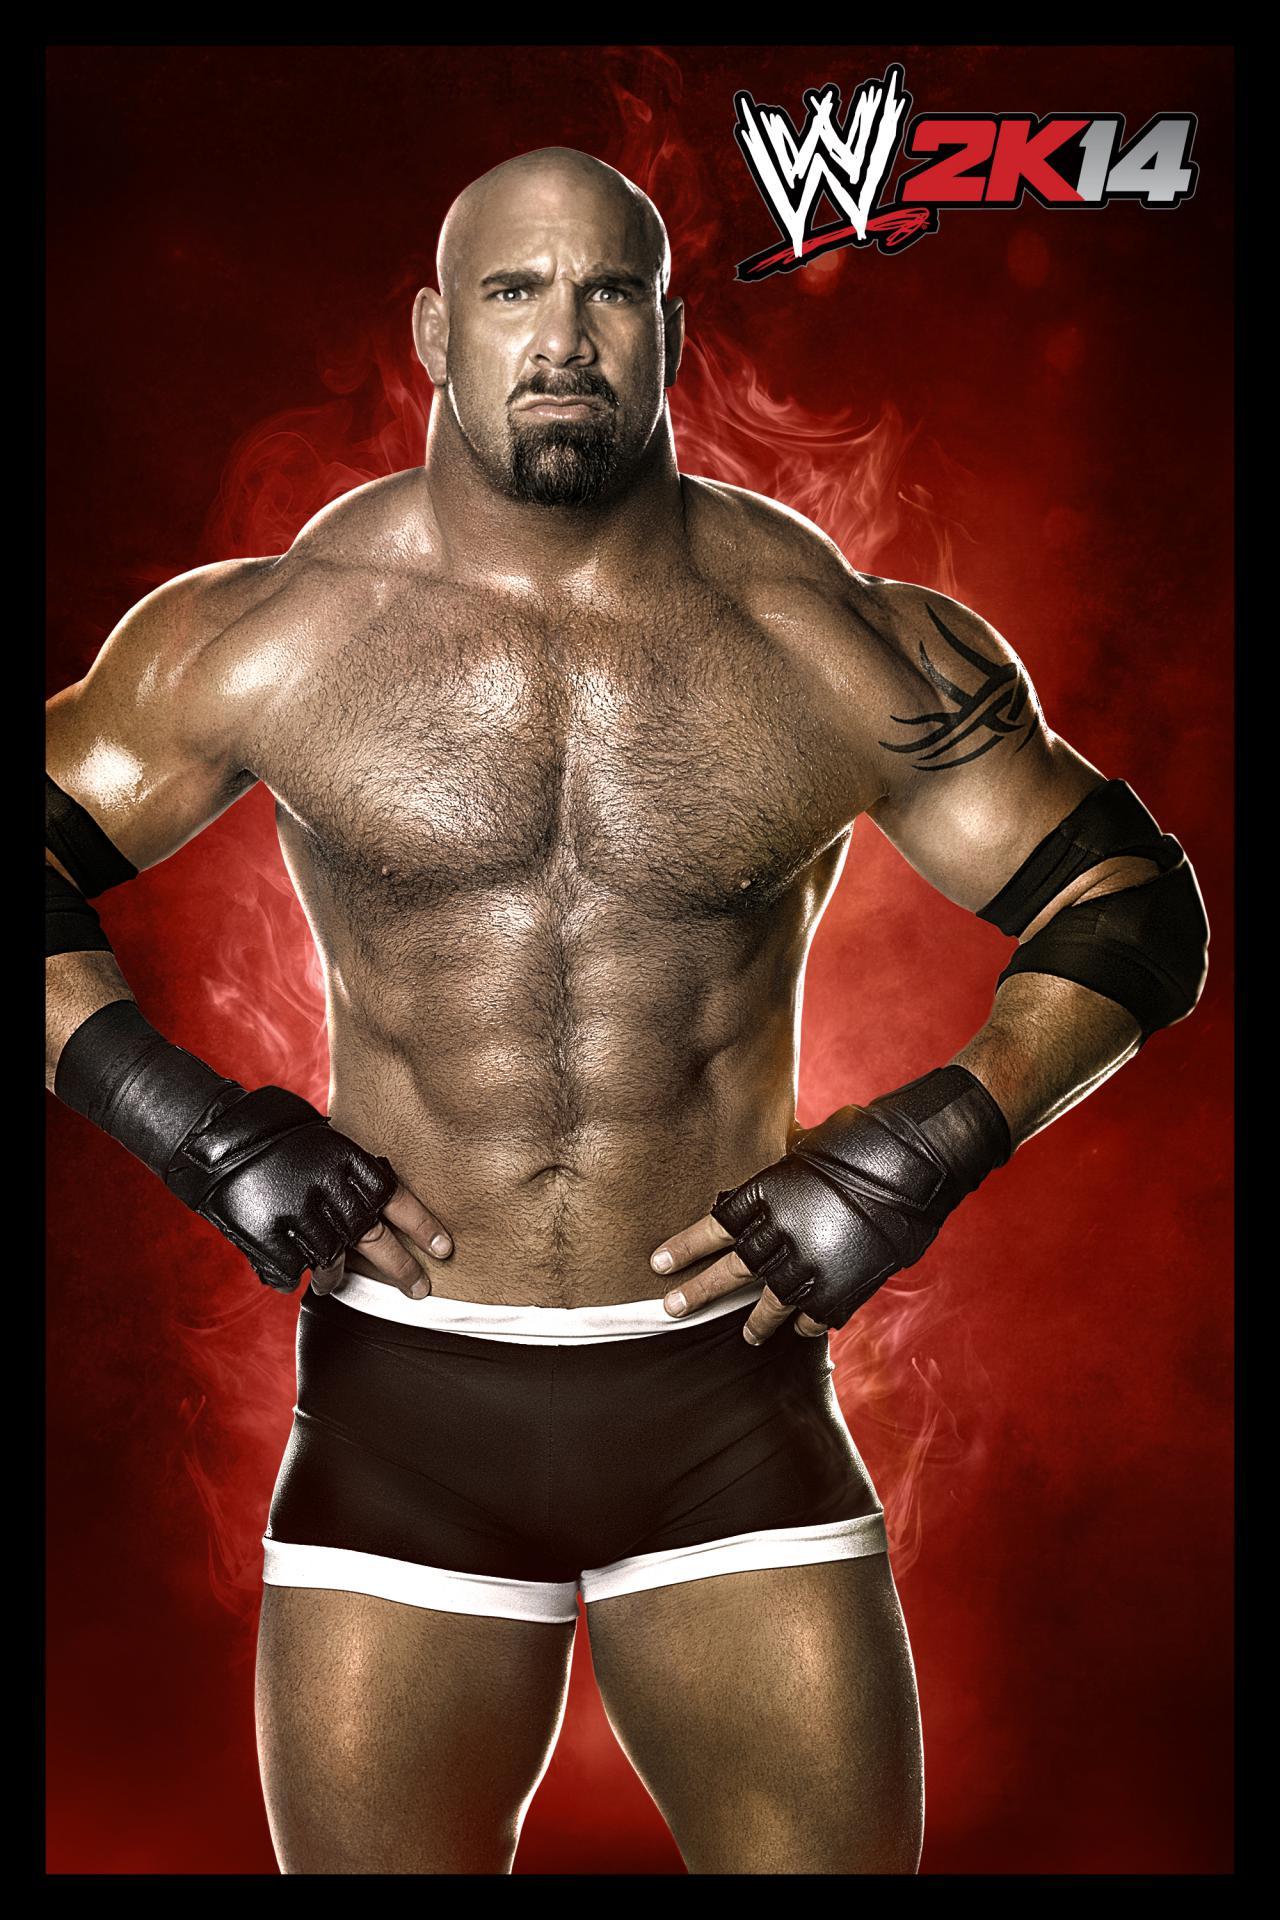 WWE 2K14's full character roster revealed, get the list & pics here